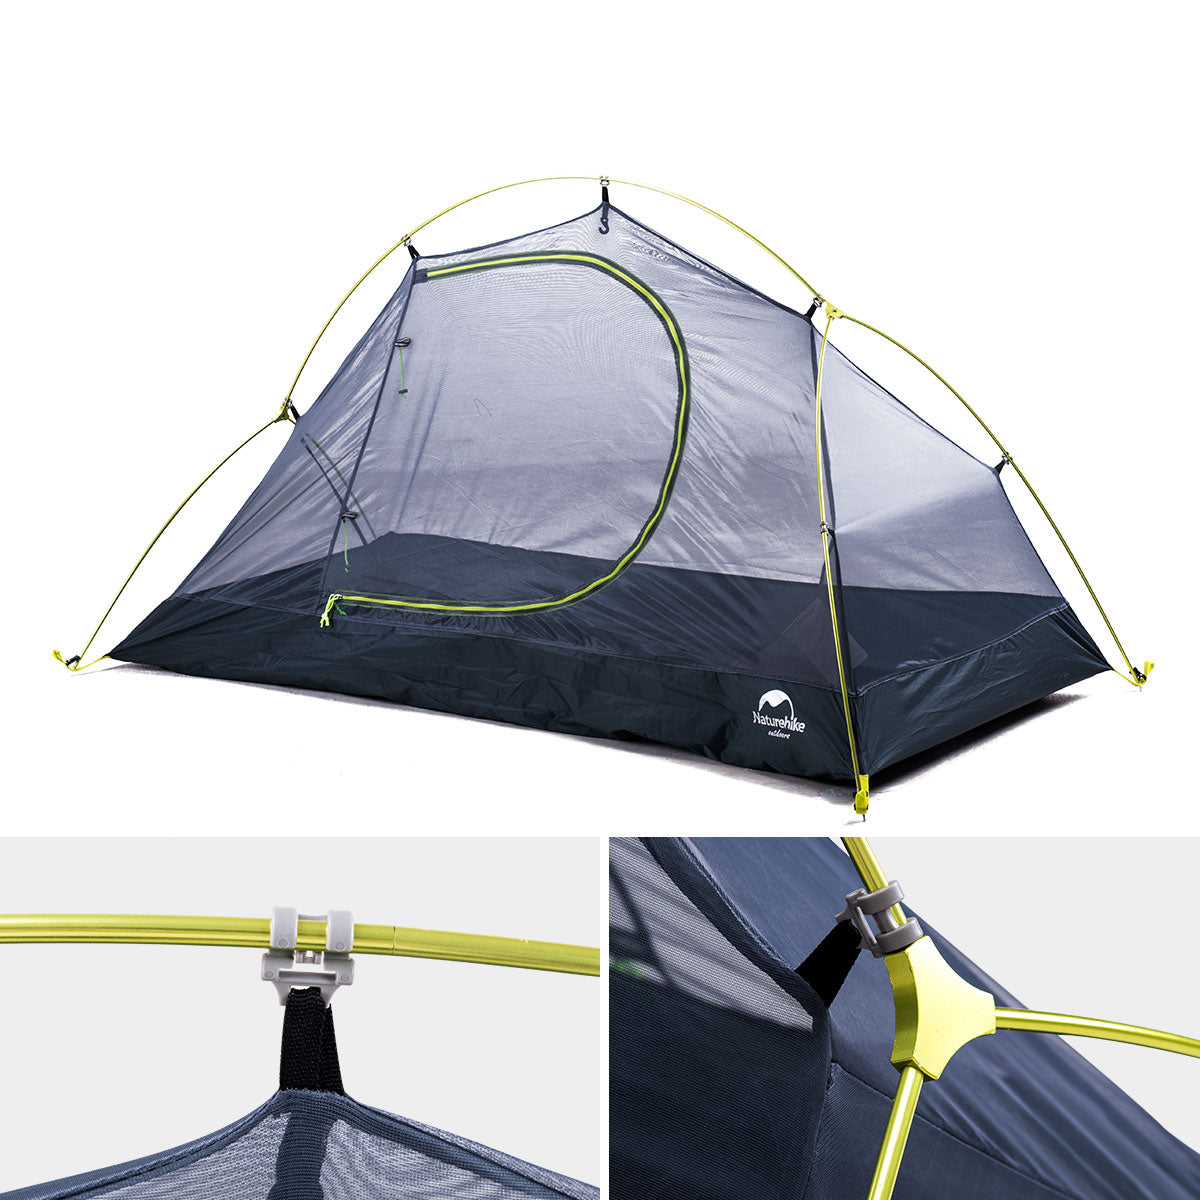 Naturehike Cycling Tent 1 Person Ultralight Backpacking Tent